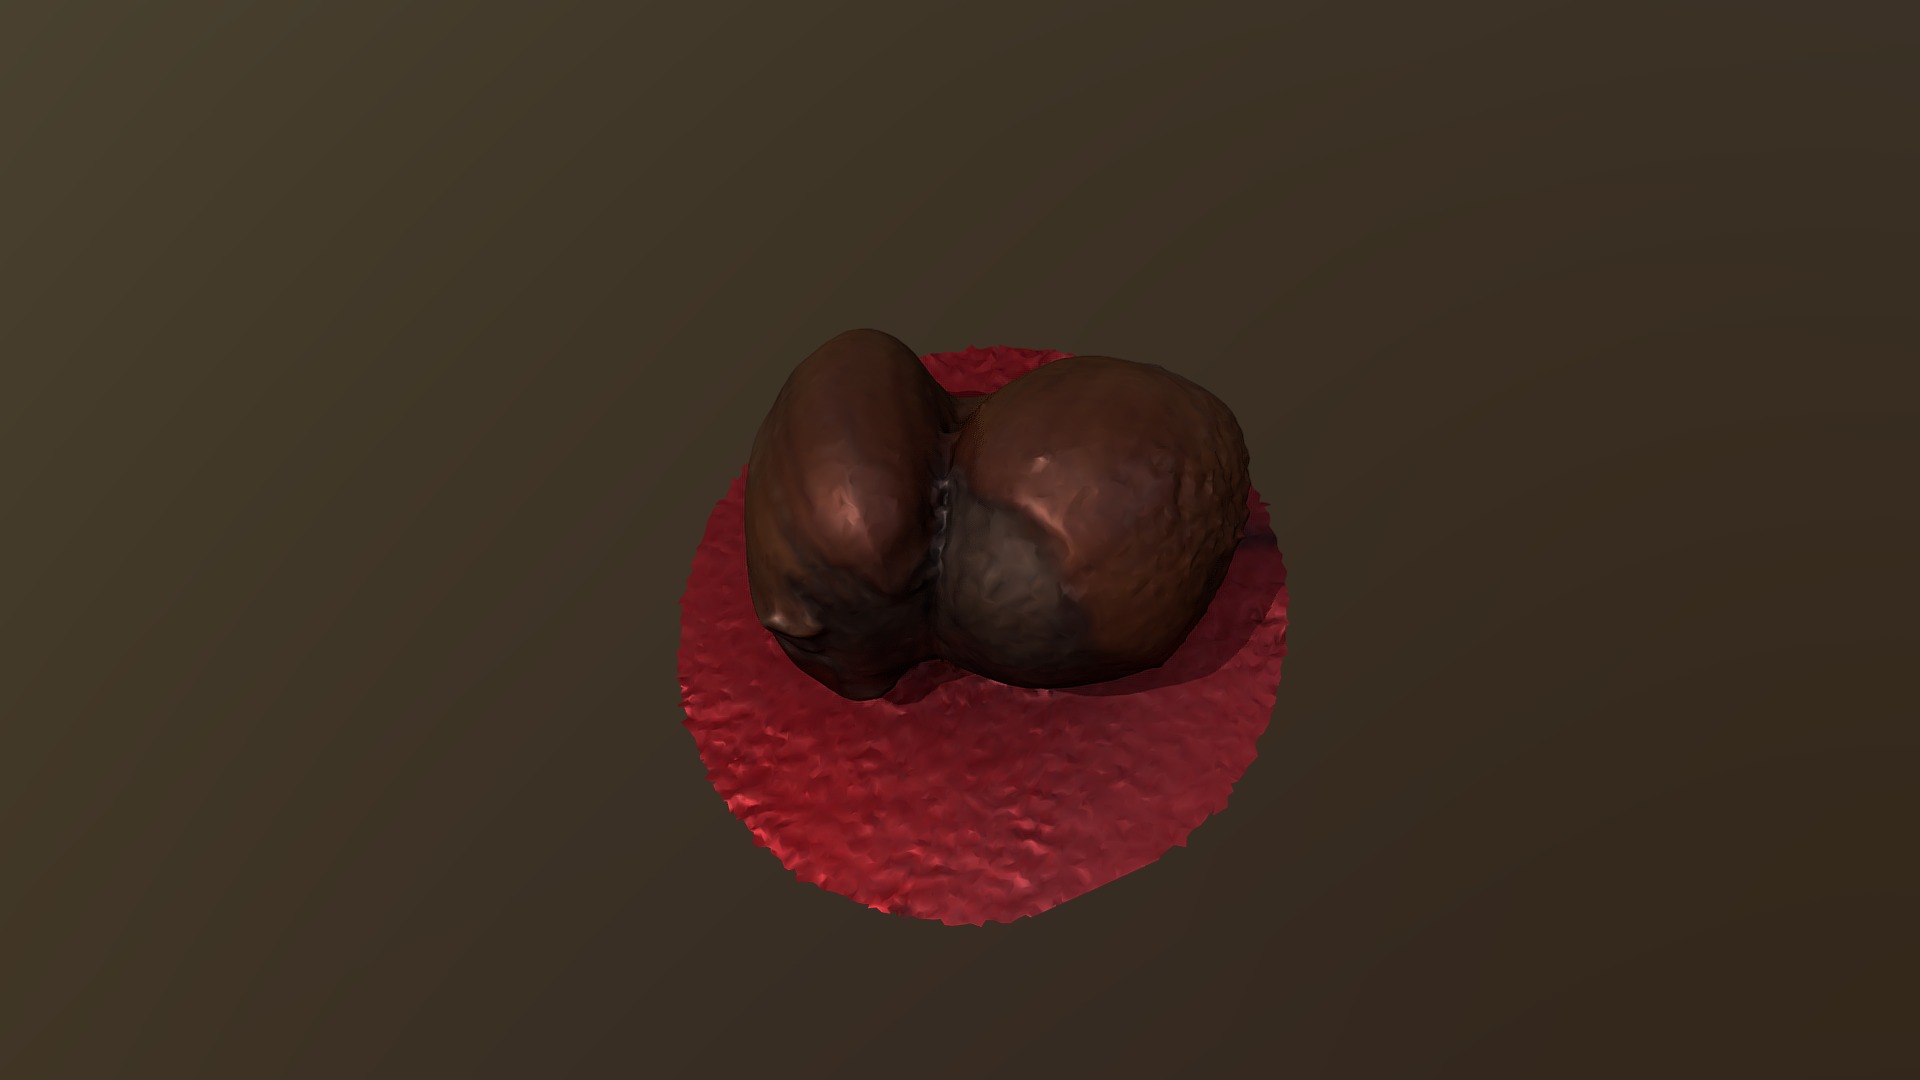 3D model Duble Nuts - This is a 3D model of the Duble Nuts. The 3D model is about a person's face on a piece of food.